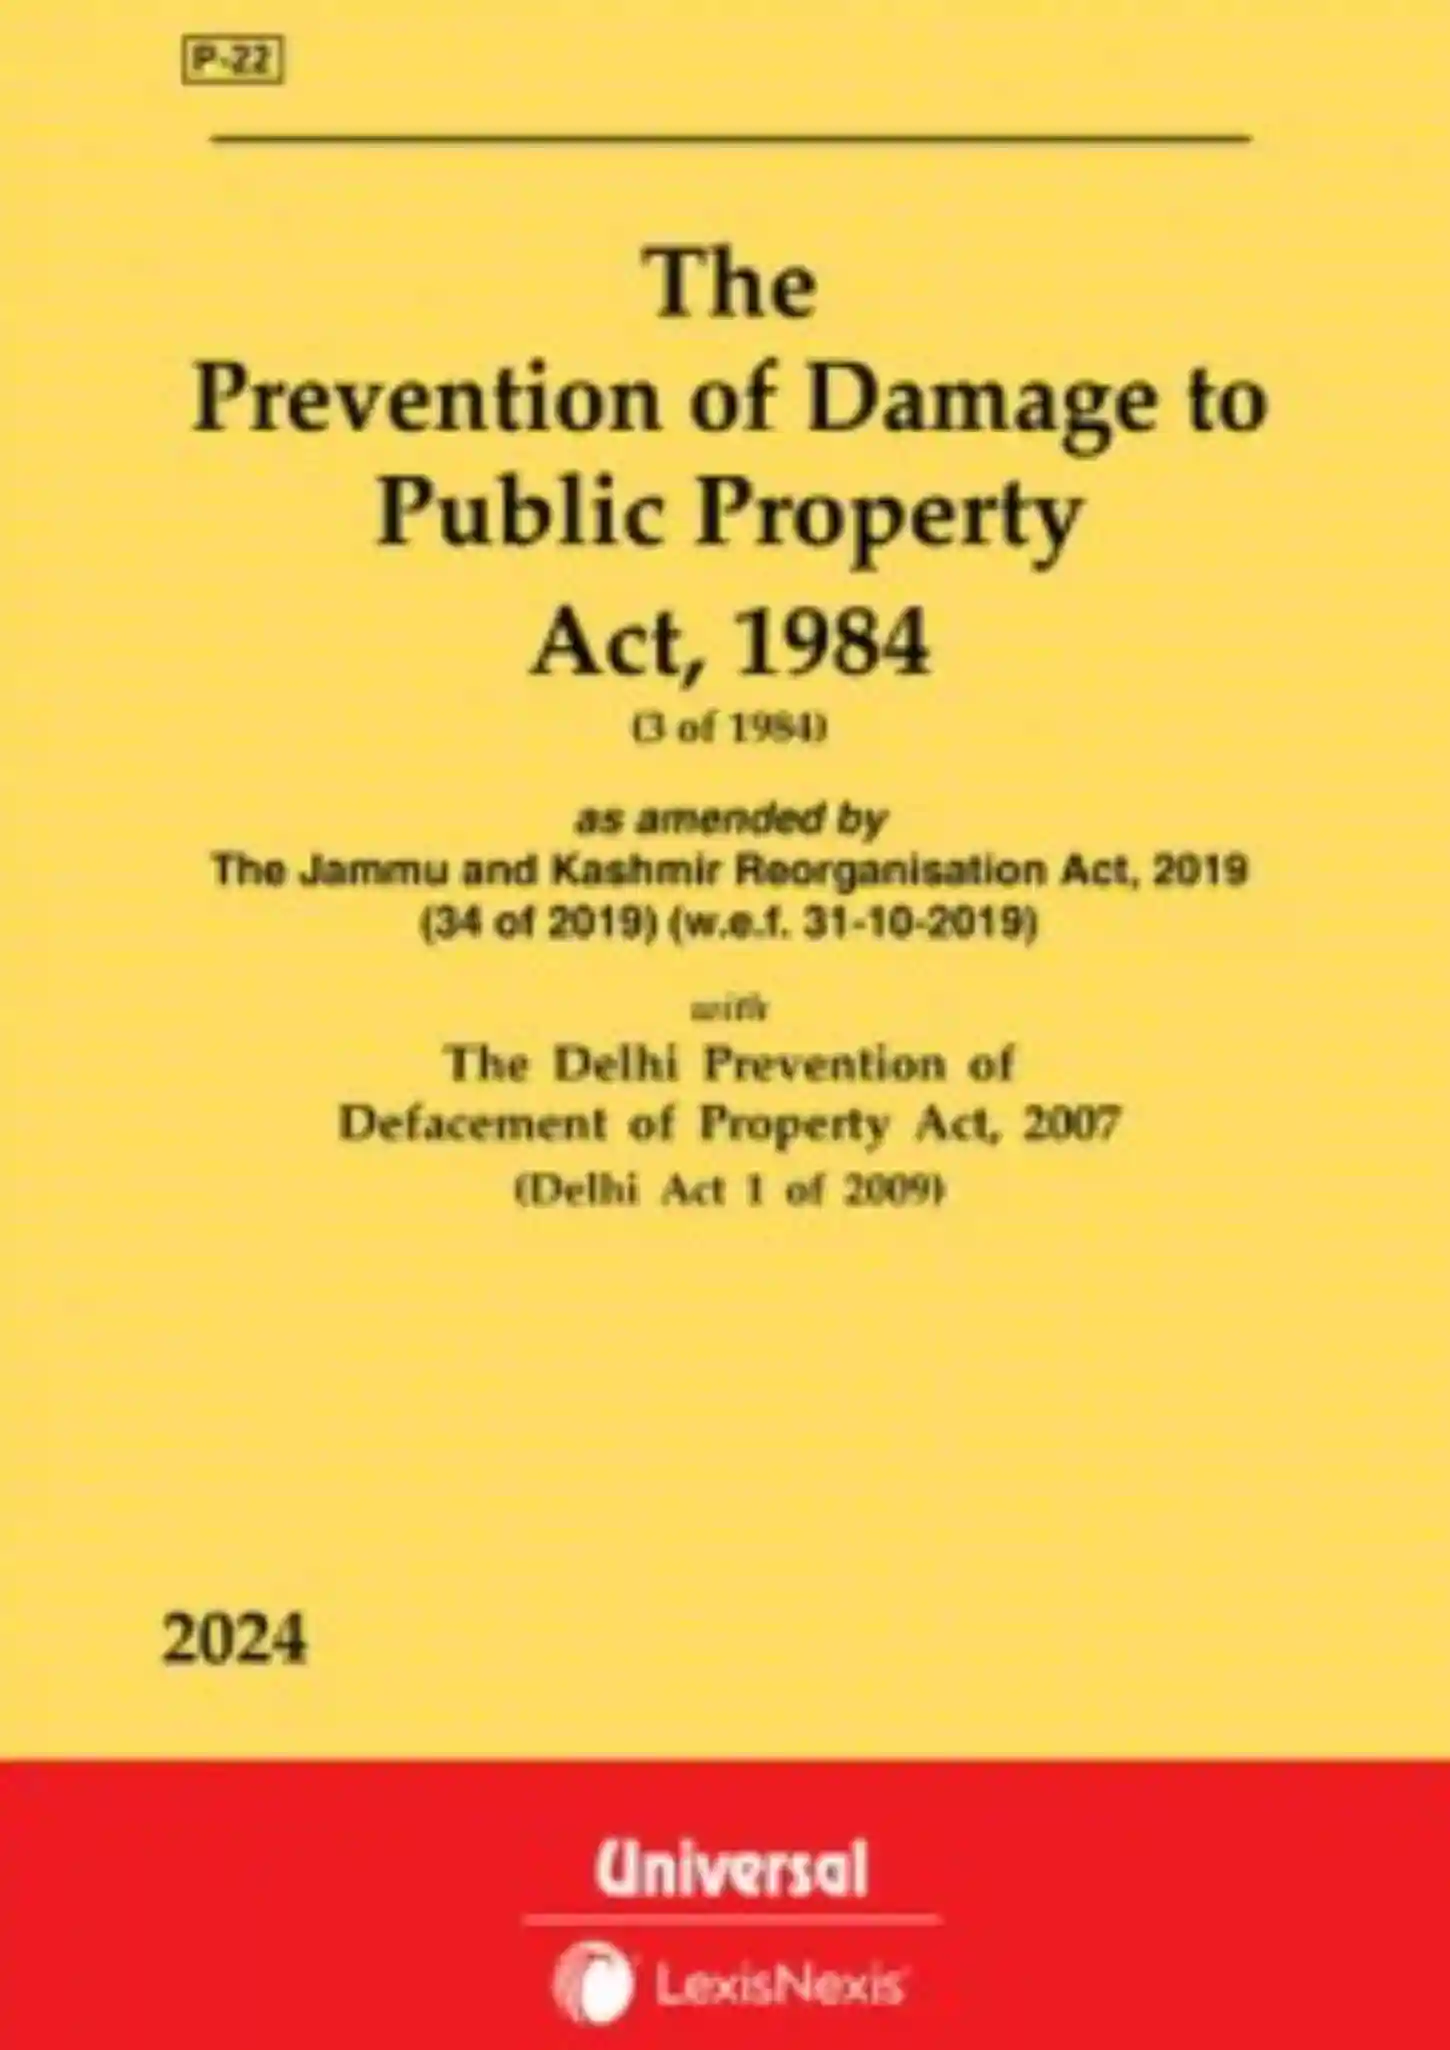 The Prevention of Damage to Public Property Act, 1984